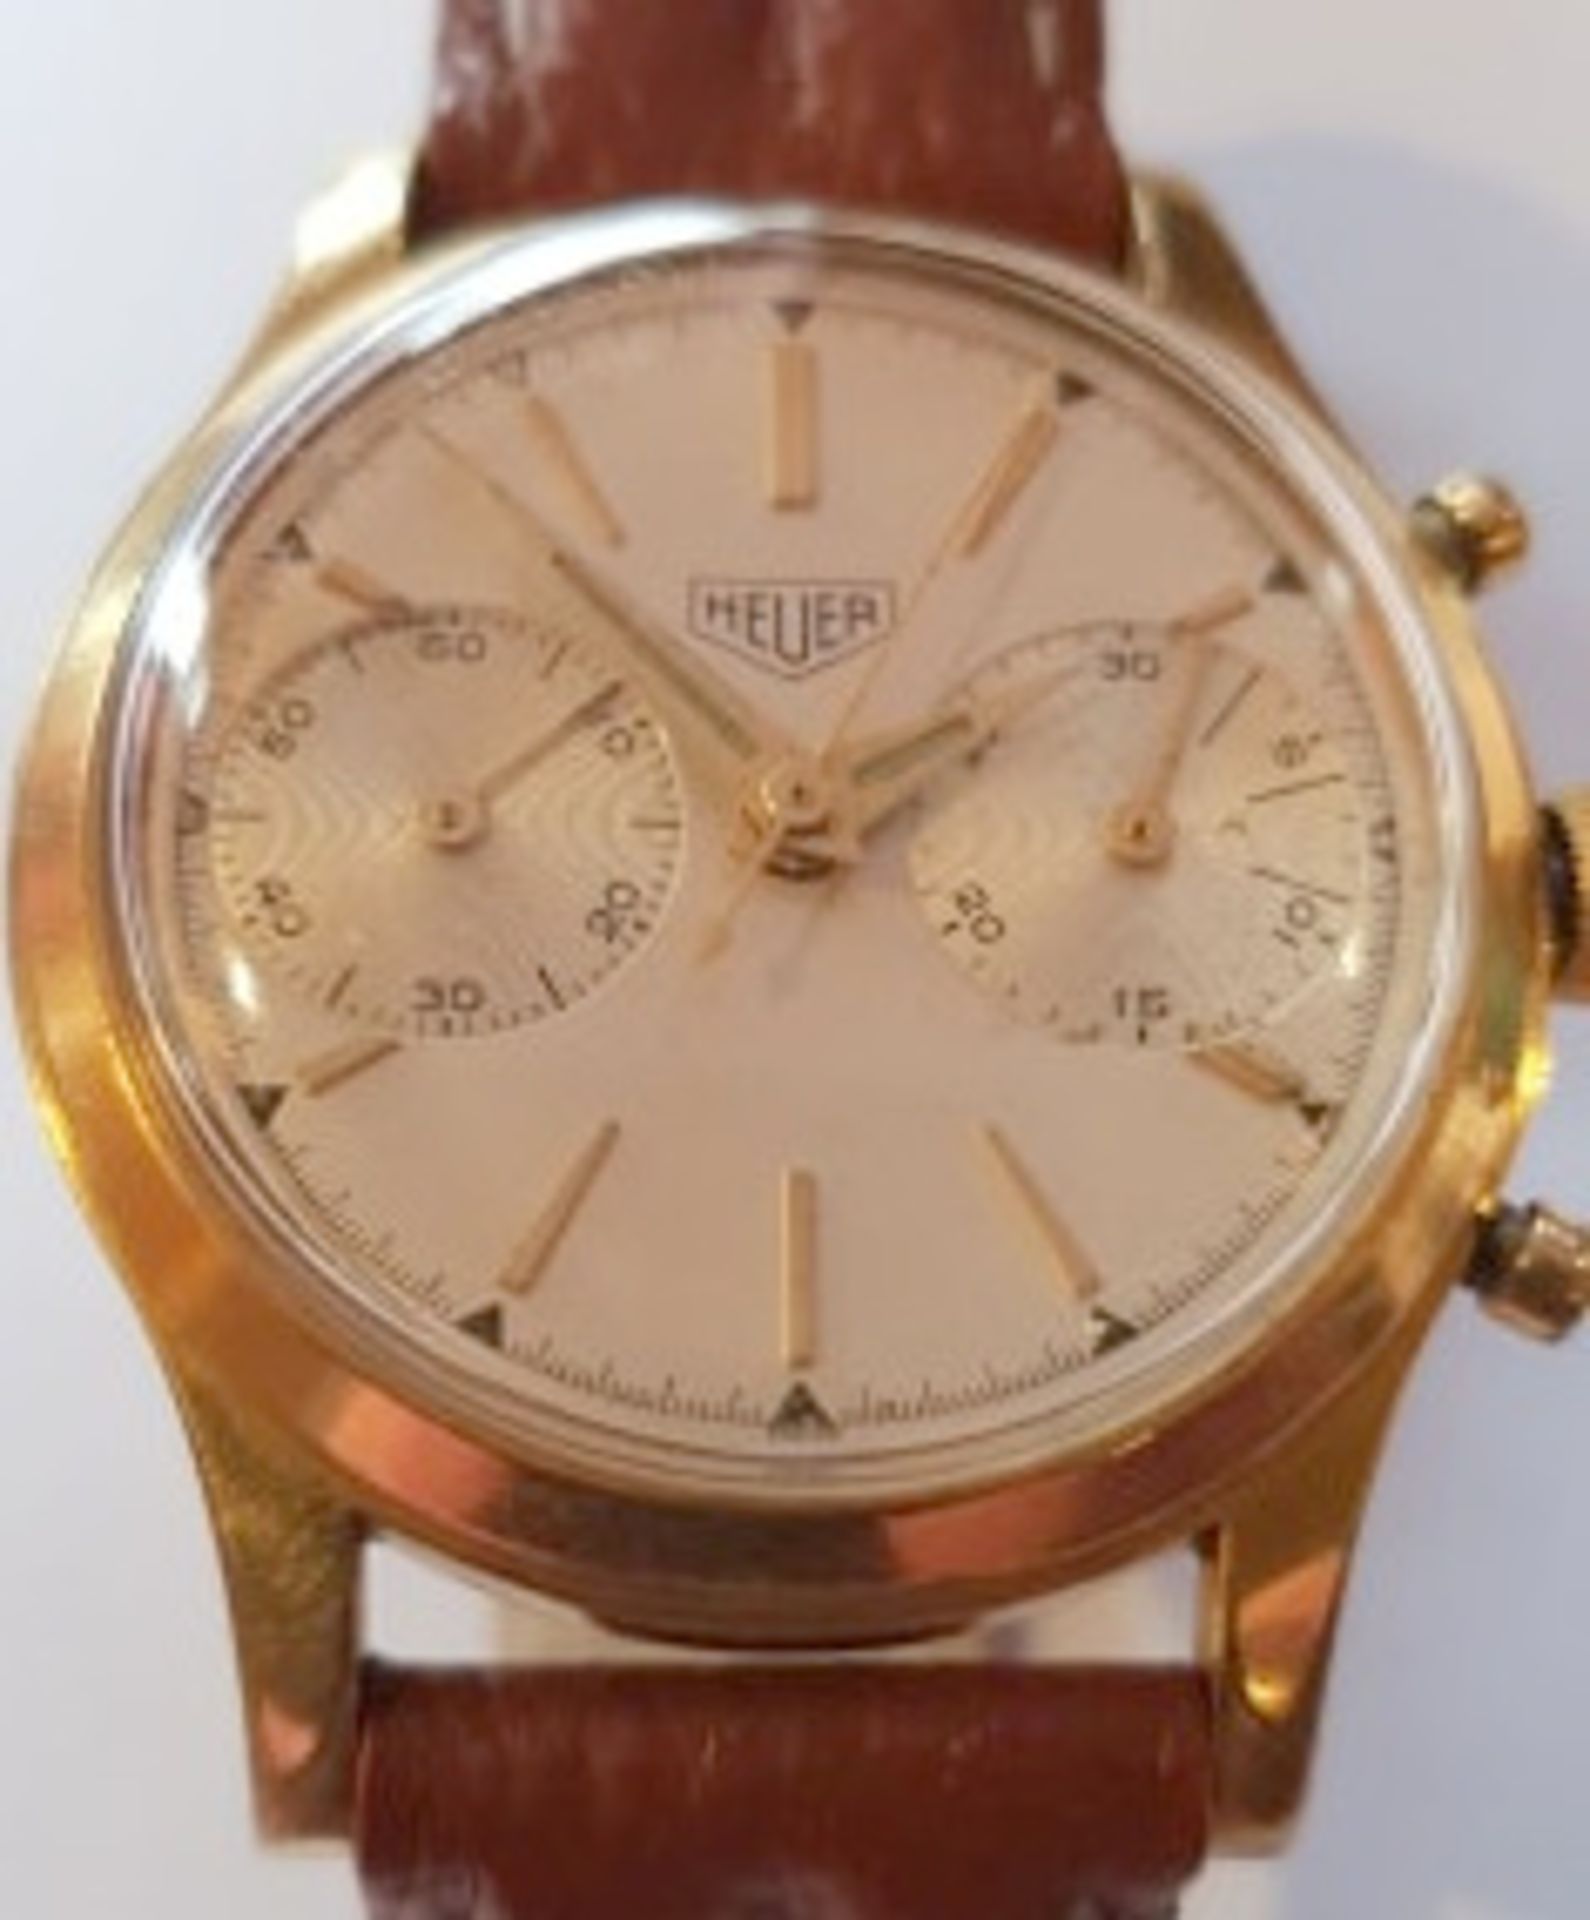 Collectable Heuer Vintage 1960/70s Manual Wind Chronograph Watch - Image 4 of 6